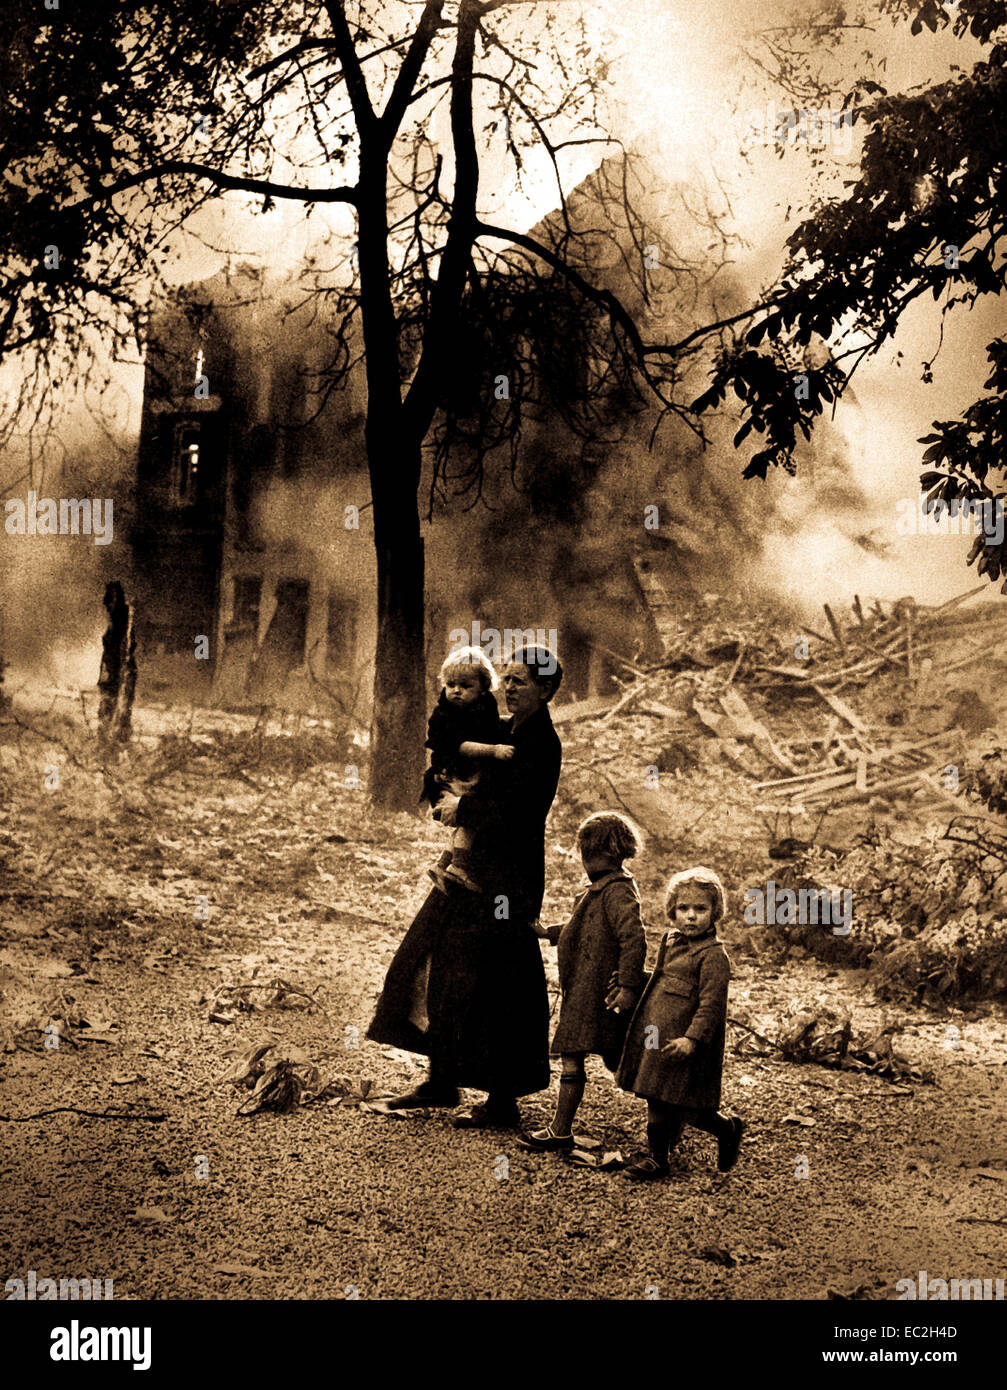 Belgian refugees flee combat as they walk past a bombed out home.  Circa 1940. Stock Photo